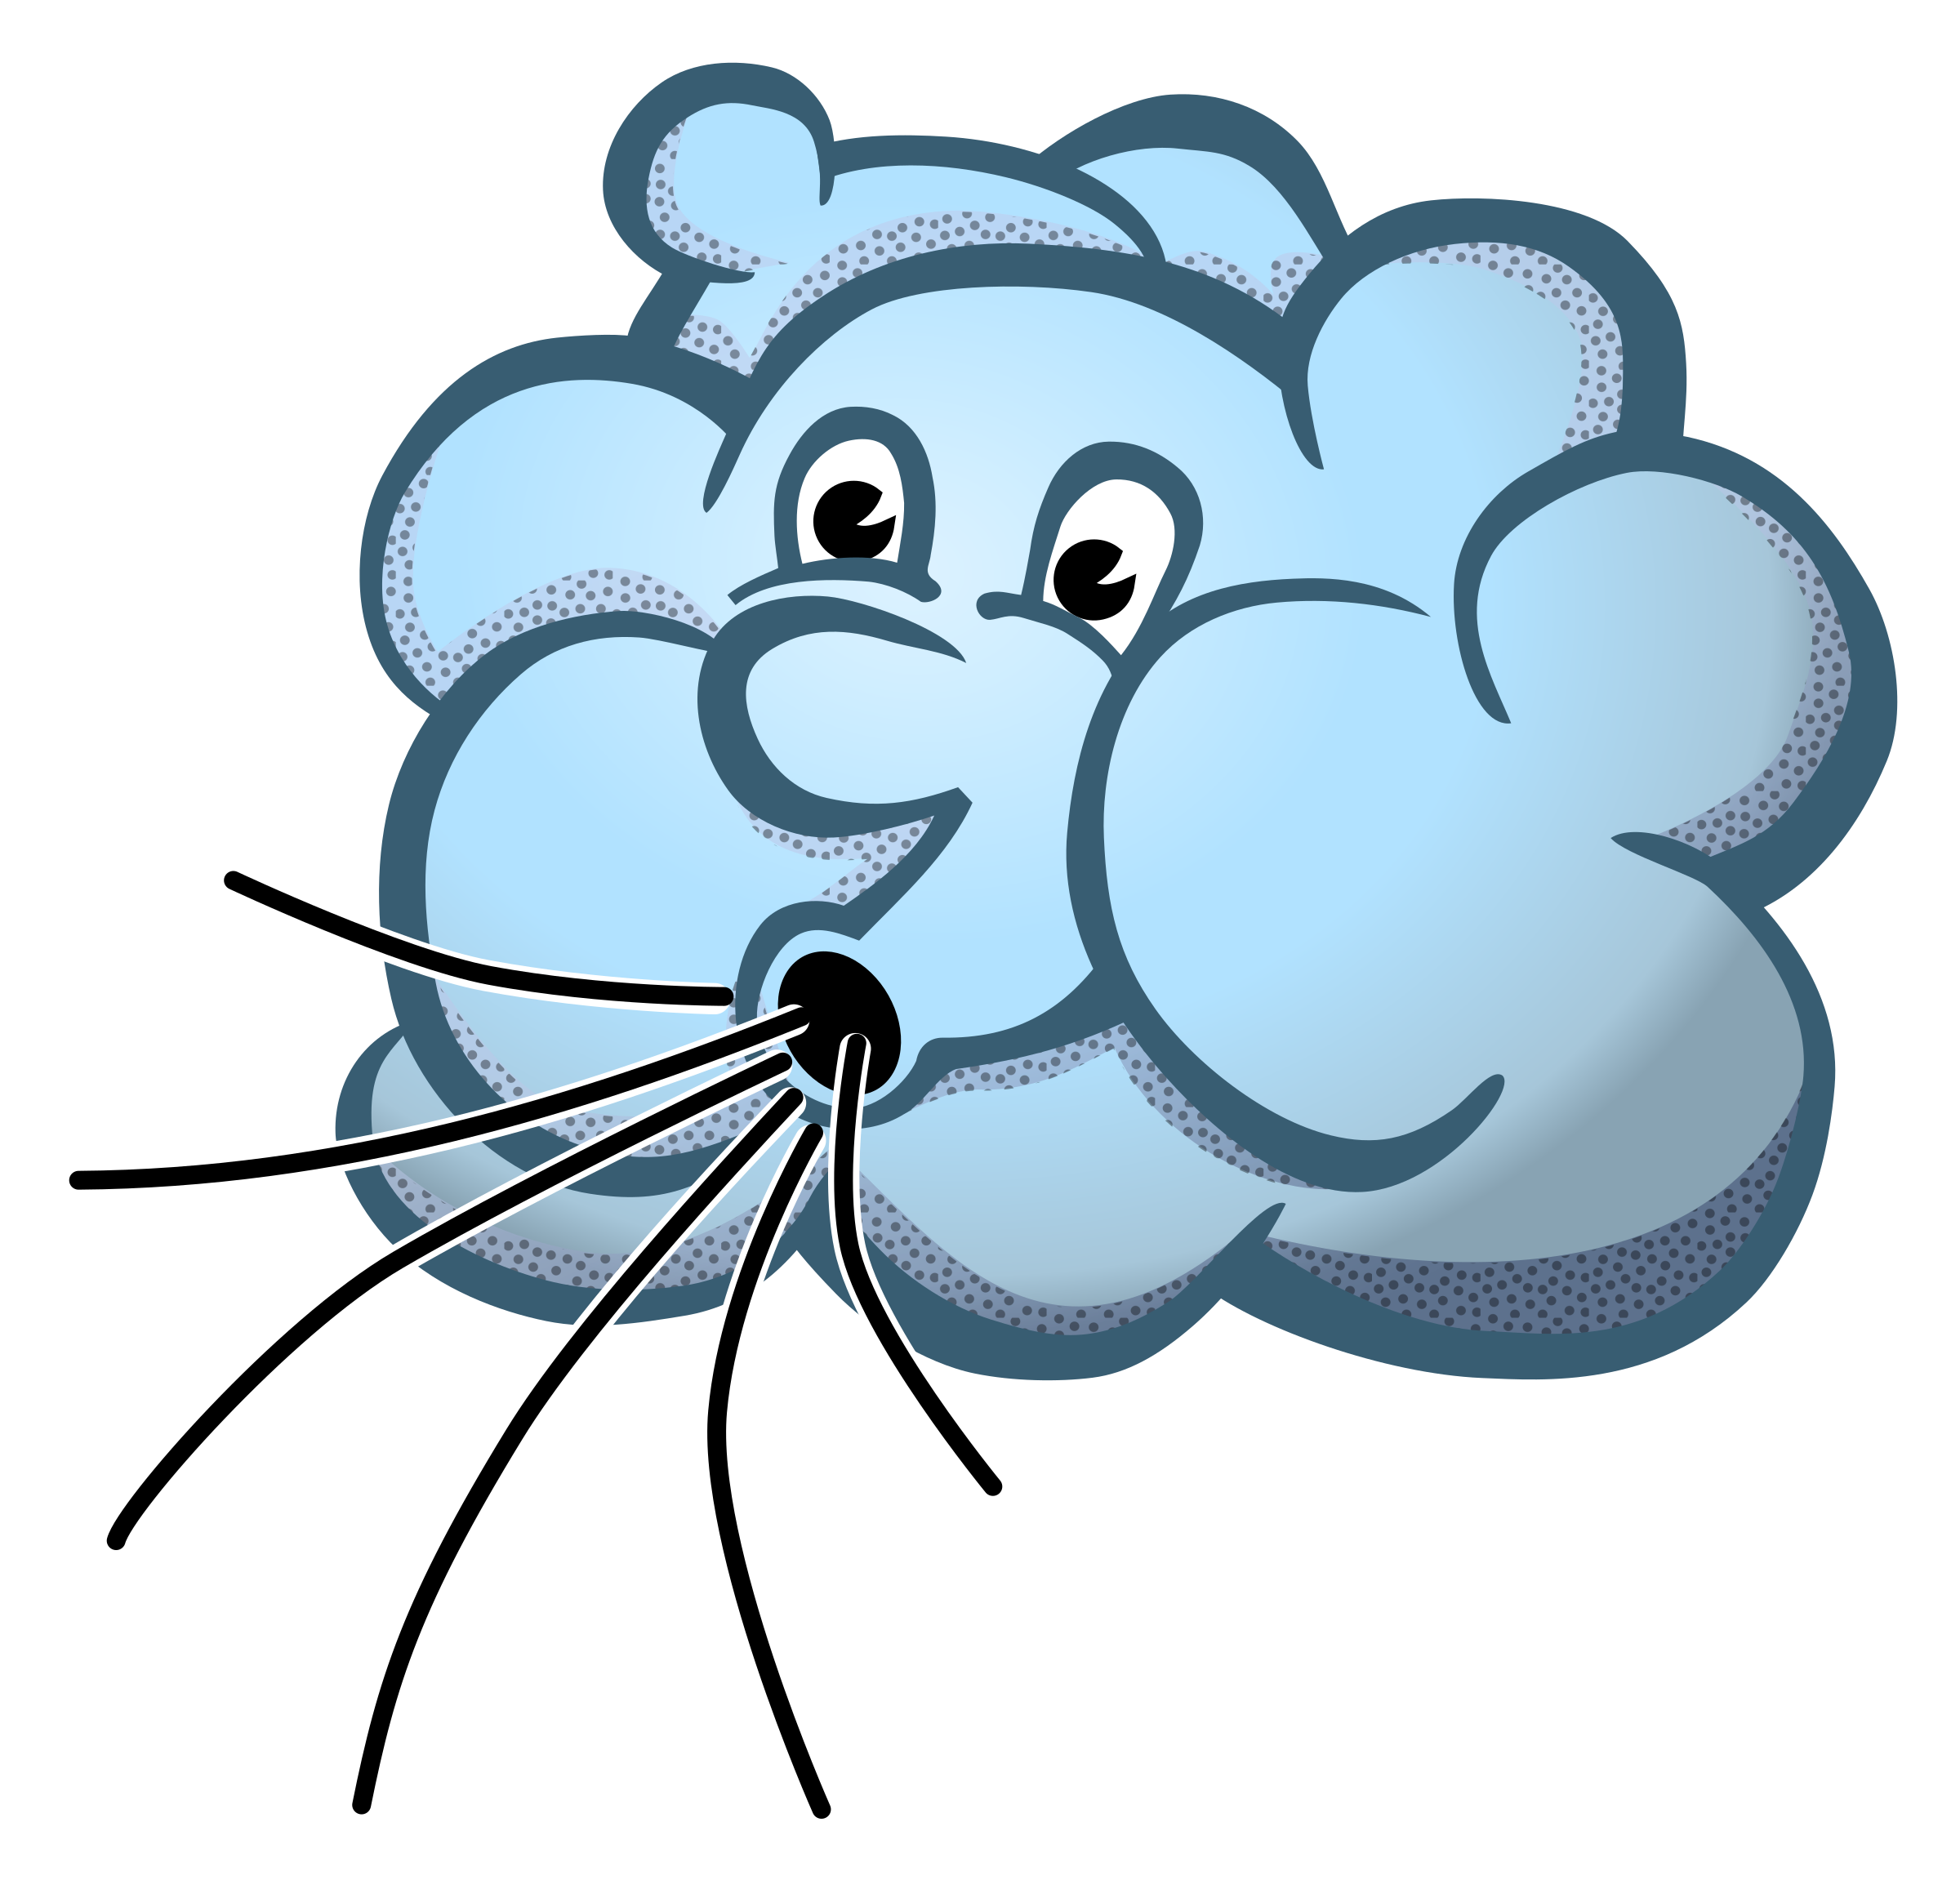 clouds clipart gray